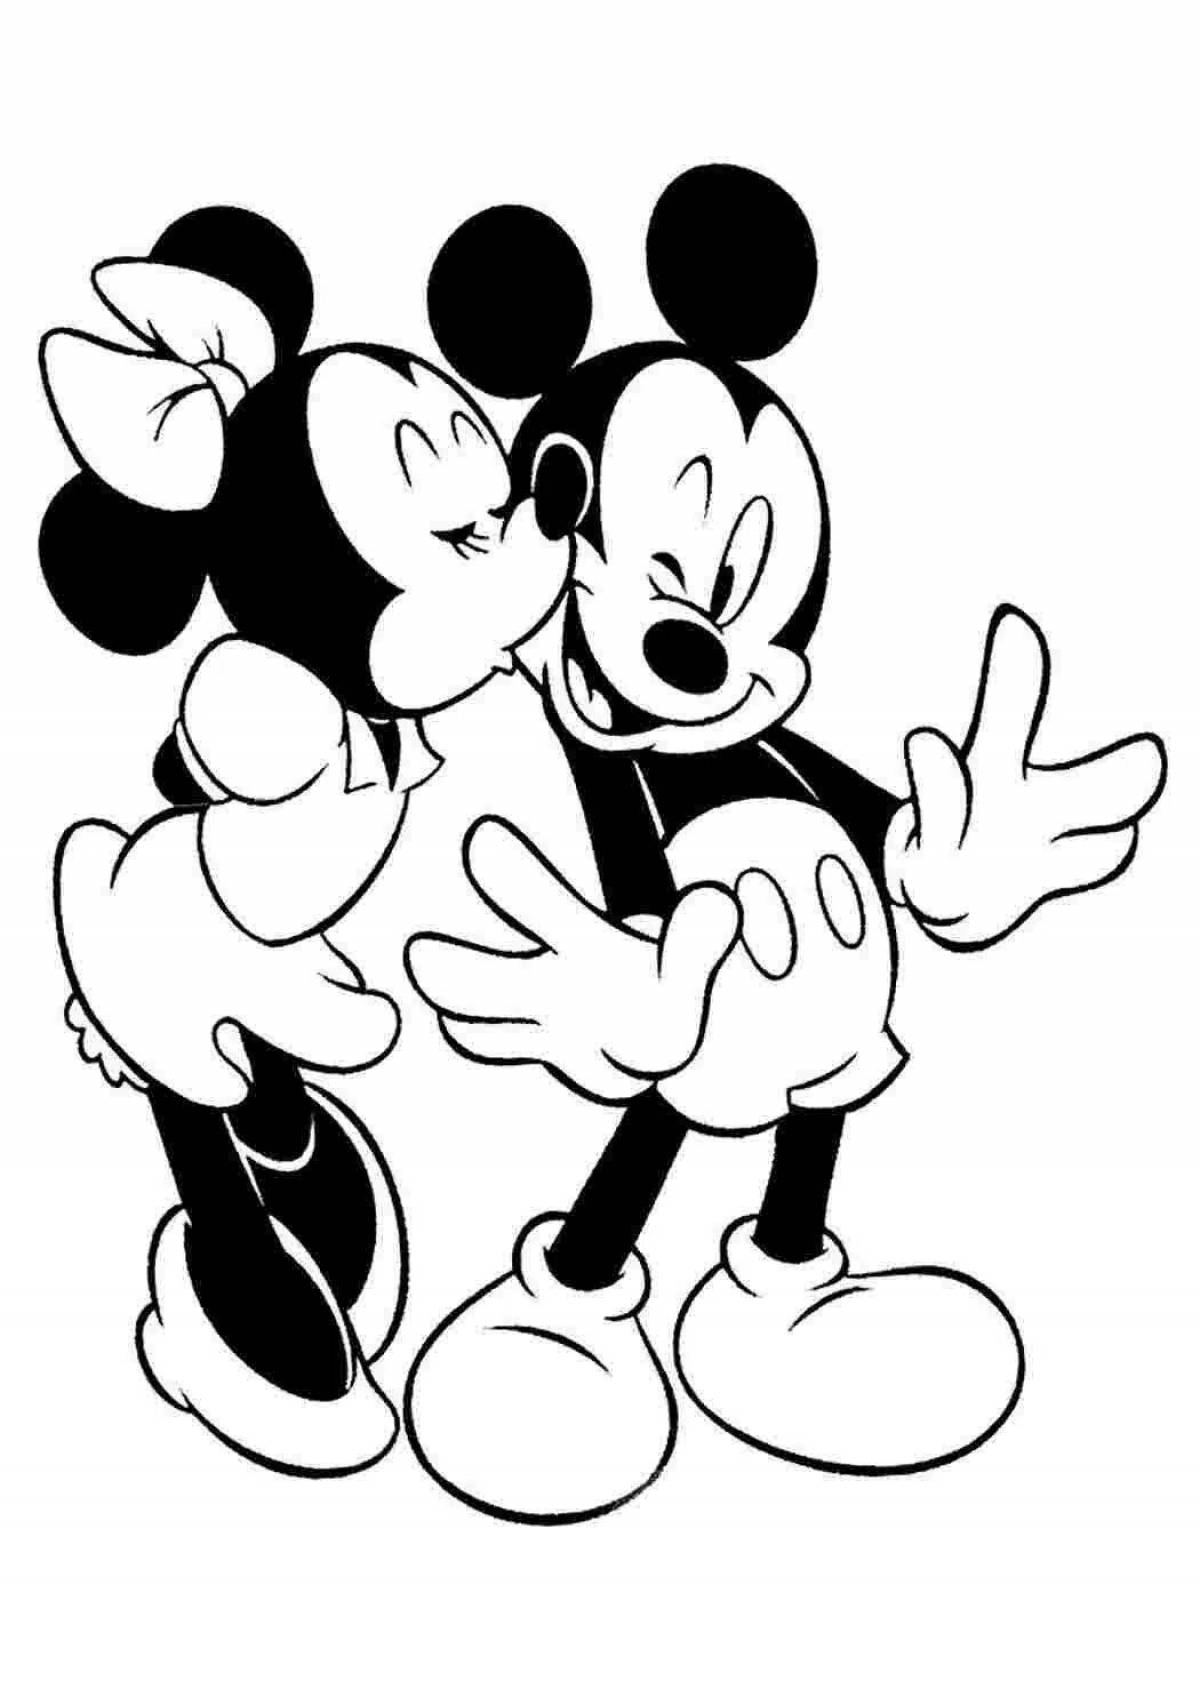 Adorable Mickey Mouse coloring book for boys